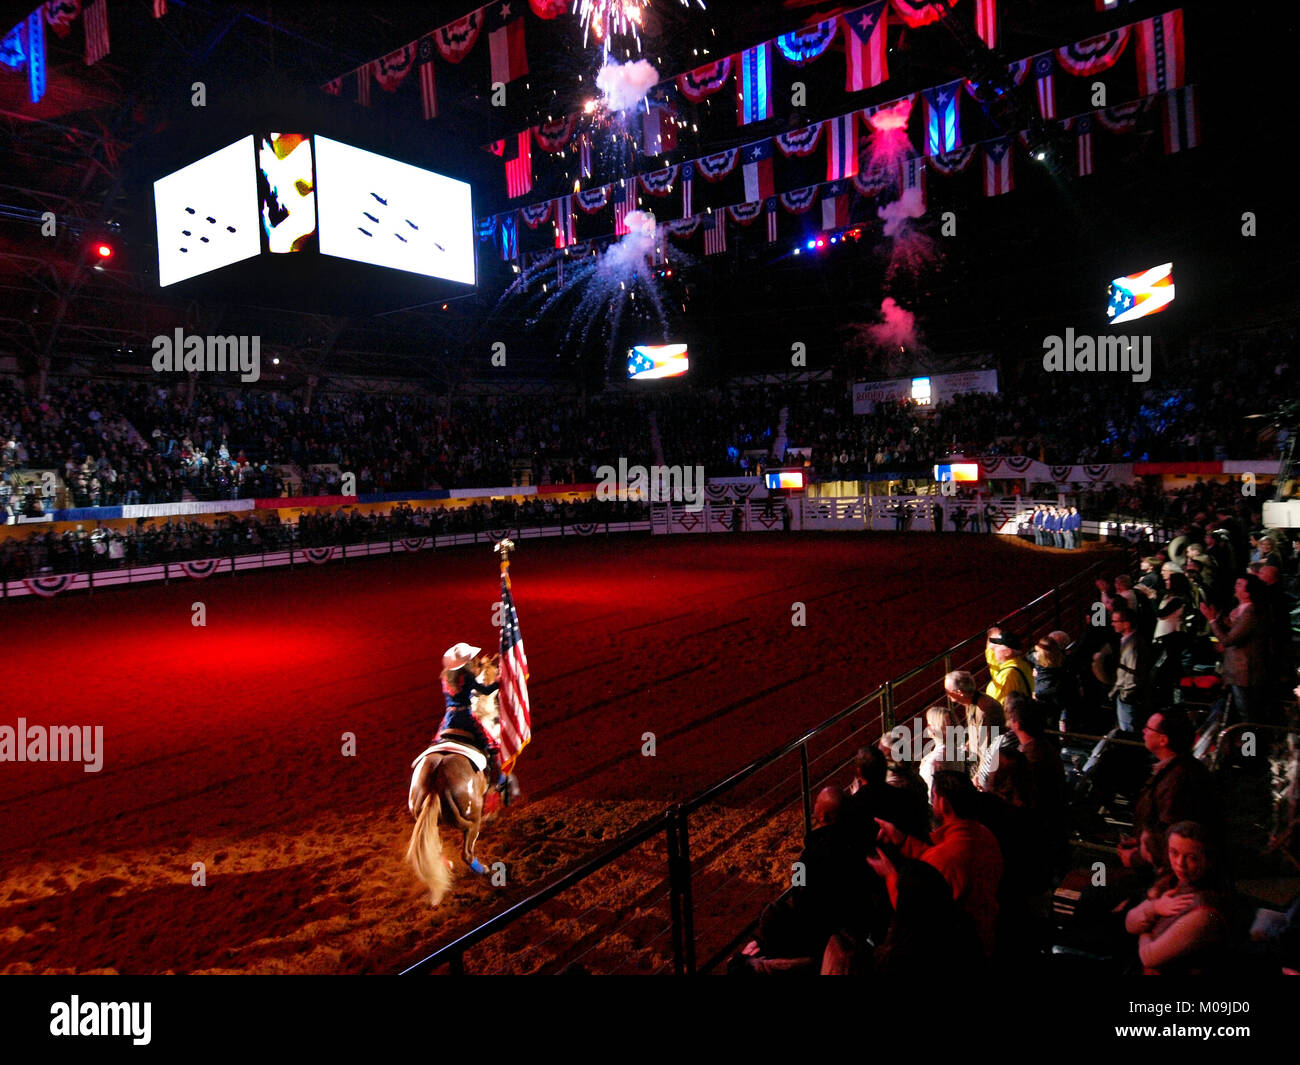 Fort Worth, USA. 19th Jan, 2018. Let the party begin, fireworks at the opening of the Fort Worth Stock Show and Rodeo opening on Friday night. Marks the 100th year the event has happened indoors, and claiming to be the world's 'original indoor rodeo.' Credit: J. G. Domke/Alamy Live News Stock Photo